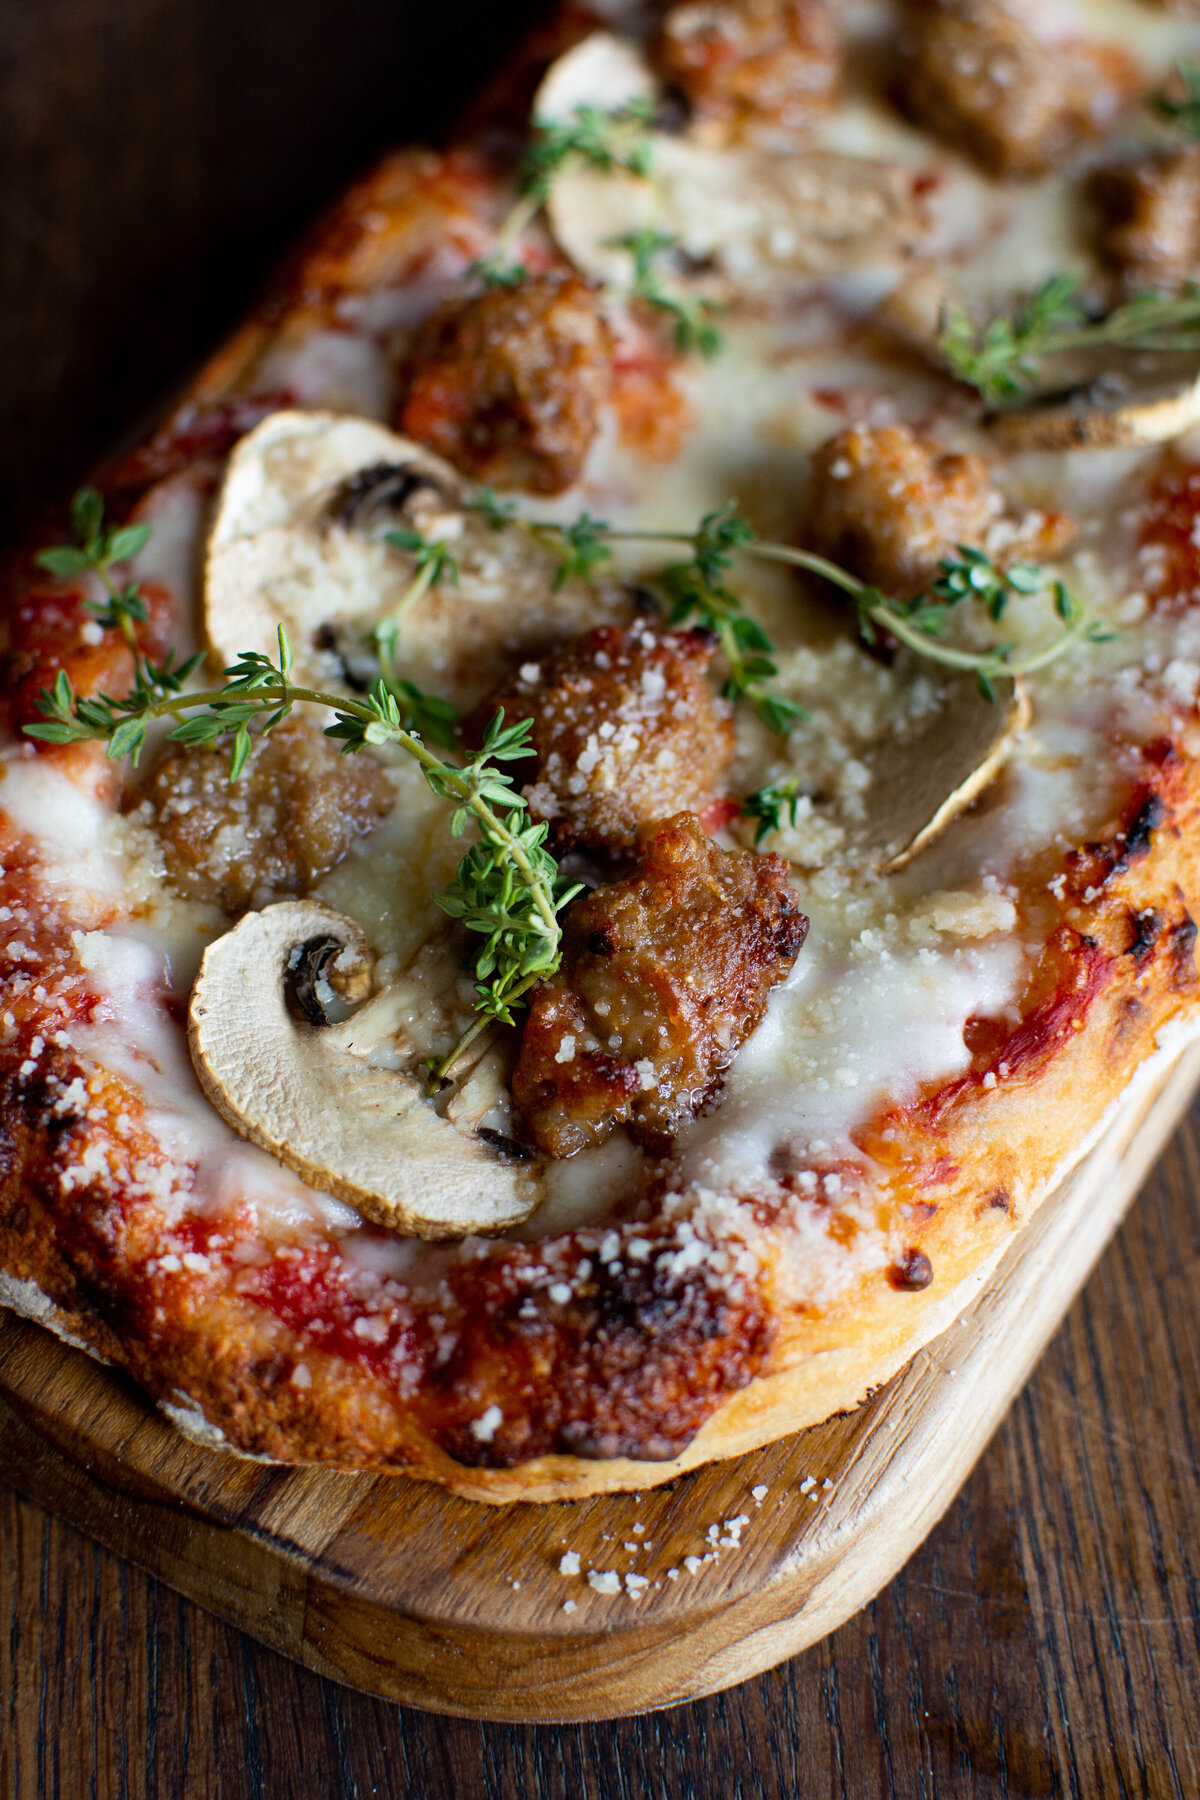 Rustic looking pizza on a cutting board with tomato sauce, mozzarella, mushroom and sausage